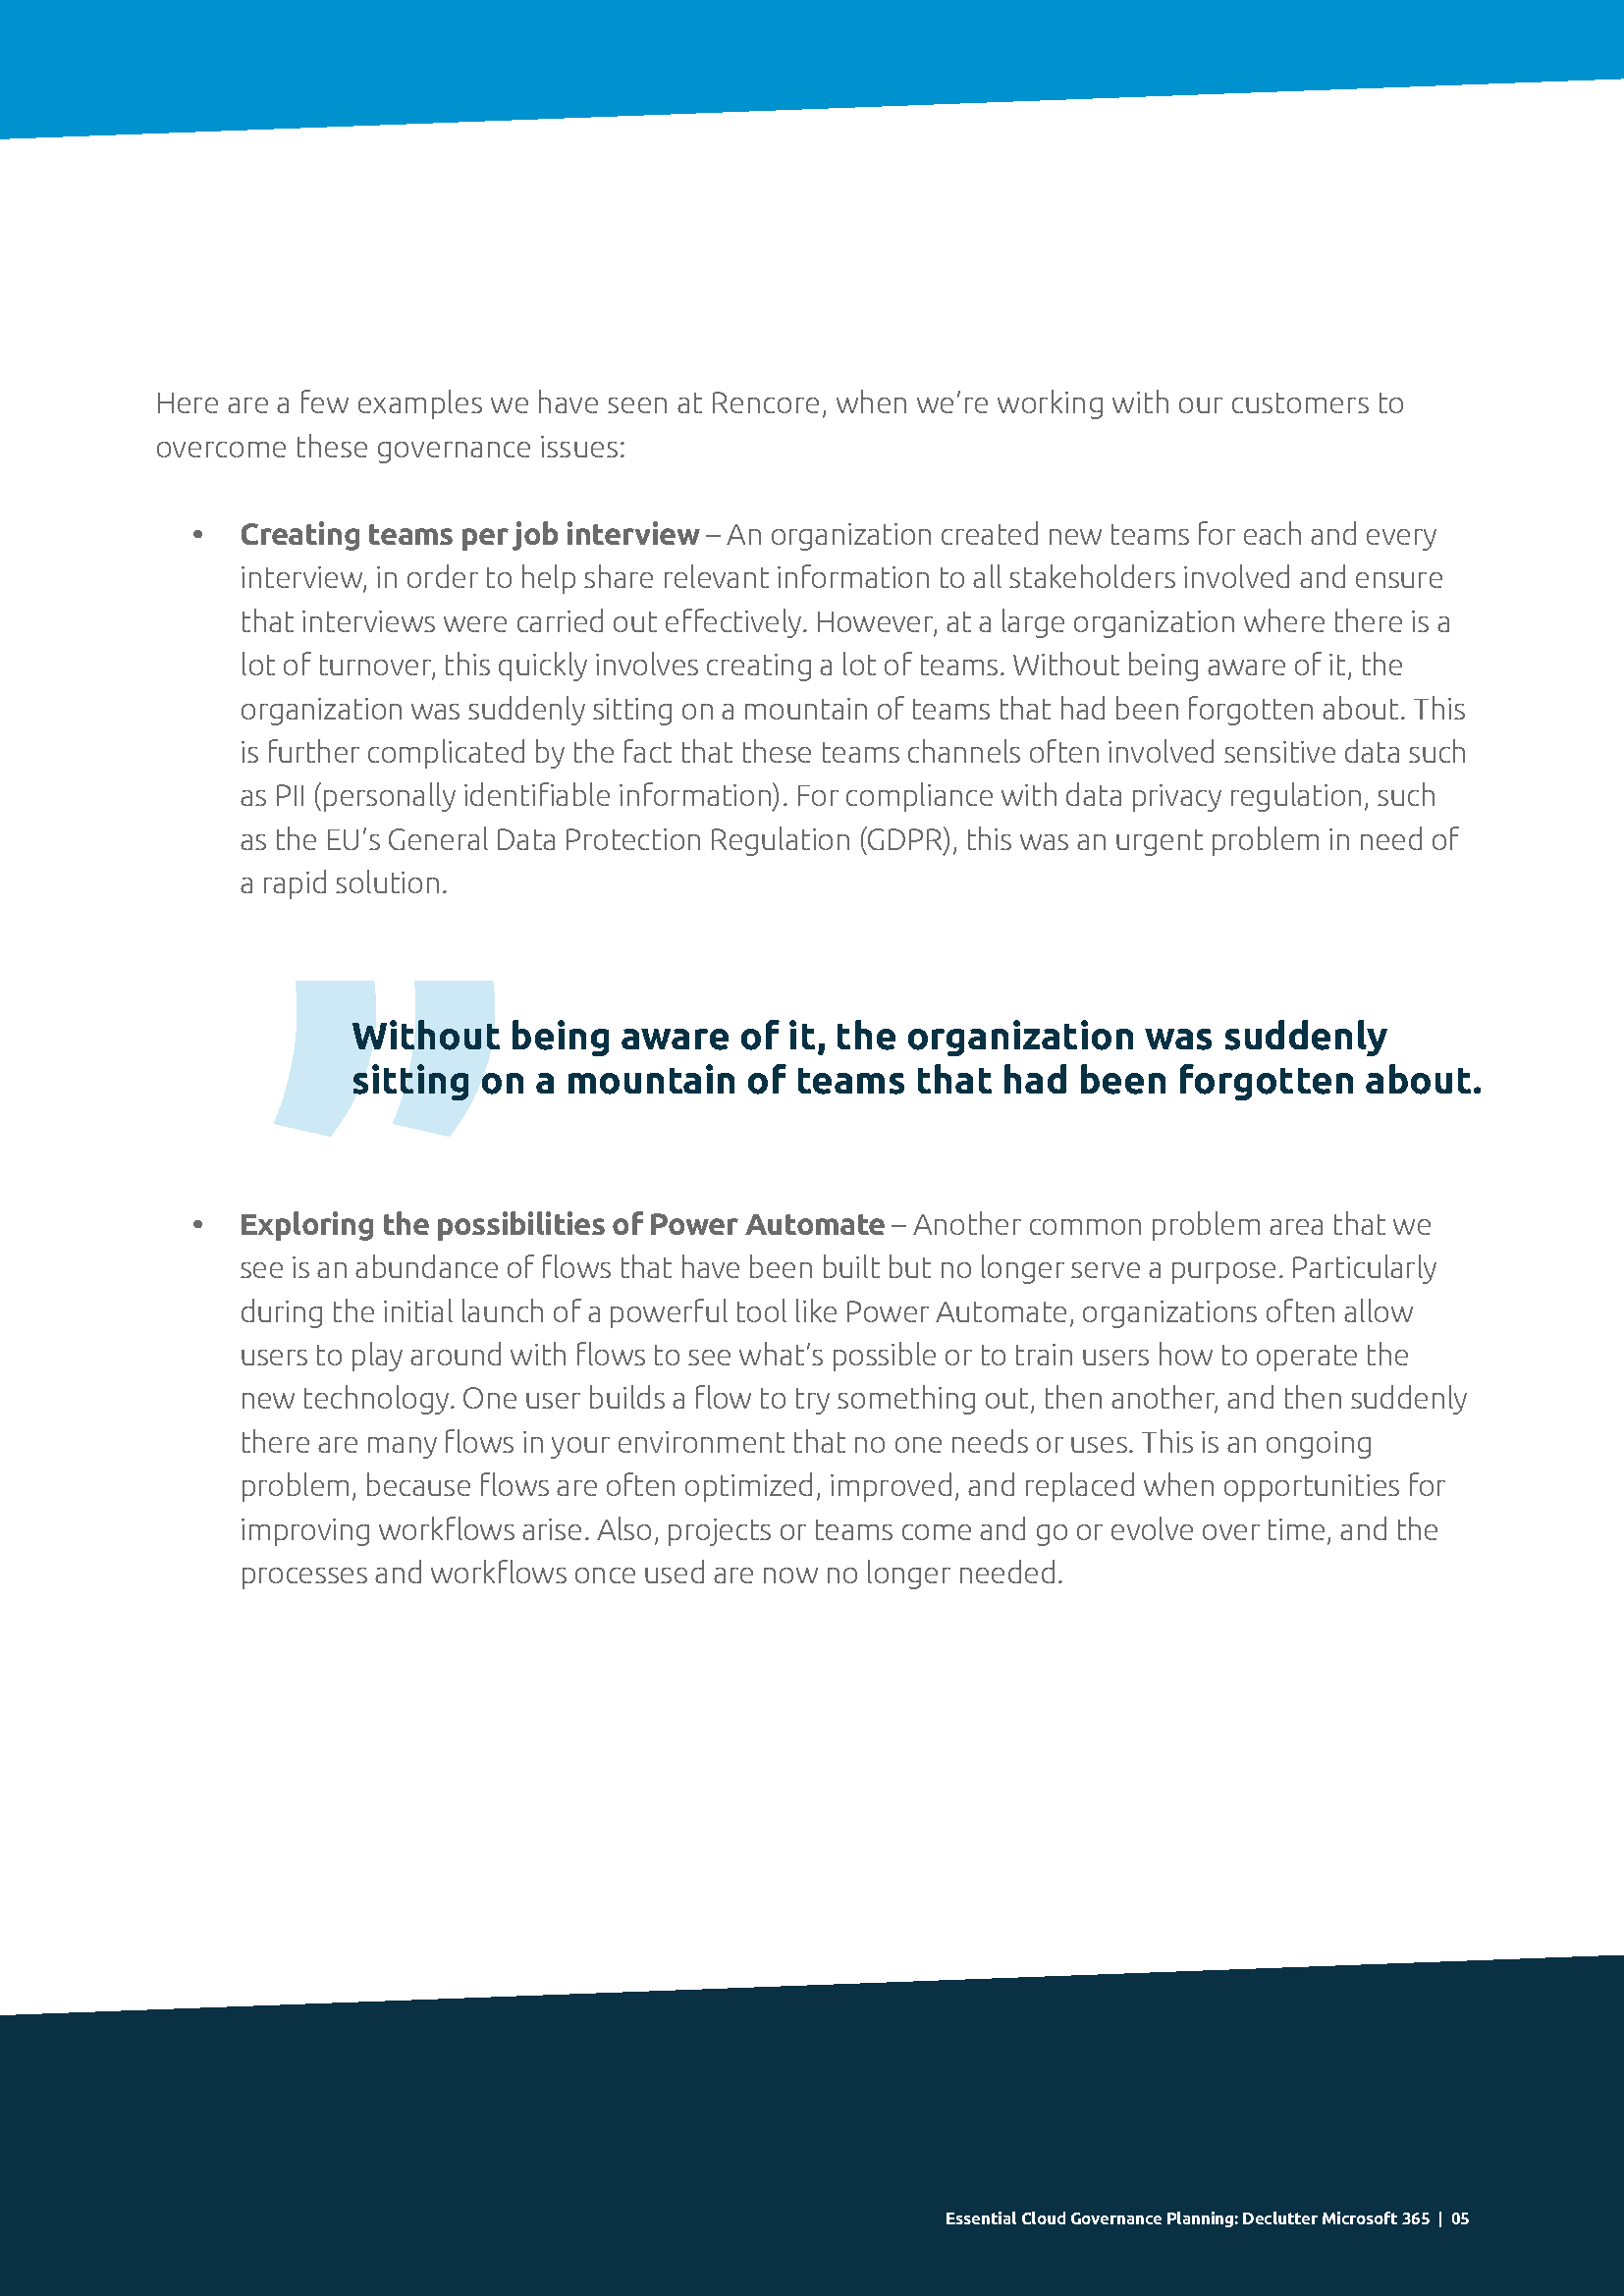 Rencore Whitepaper - Essential Cloud Governance Planning_Page_05